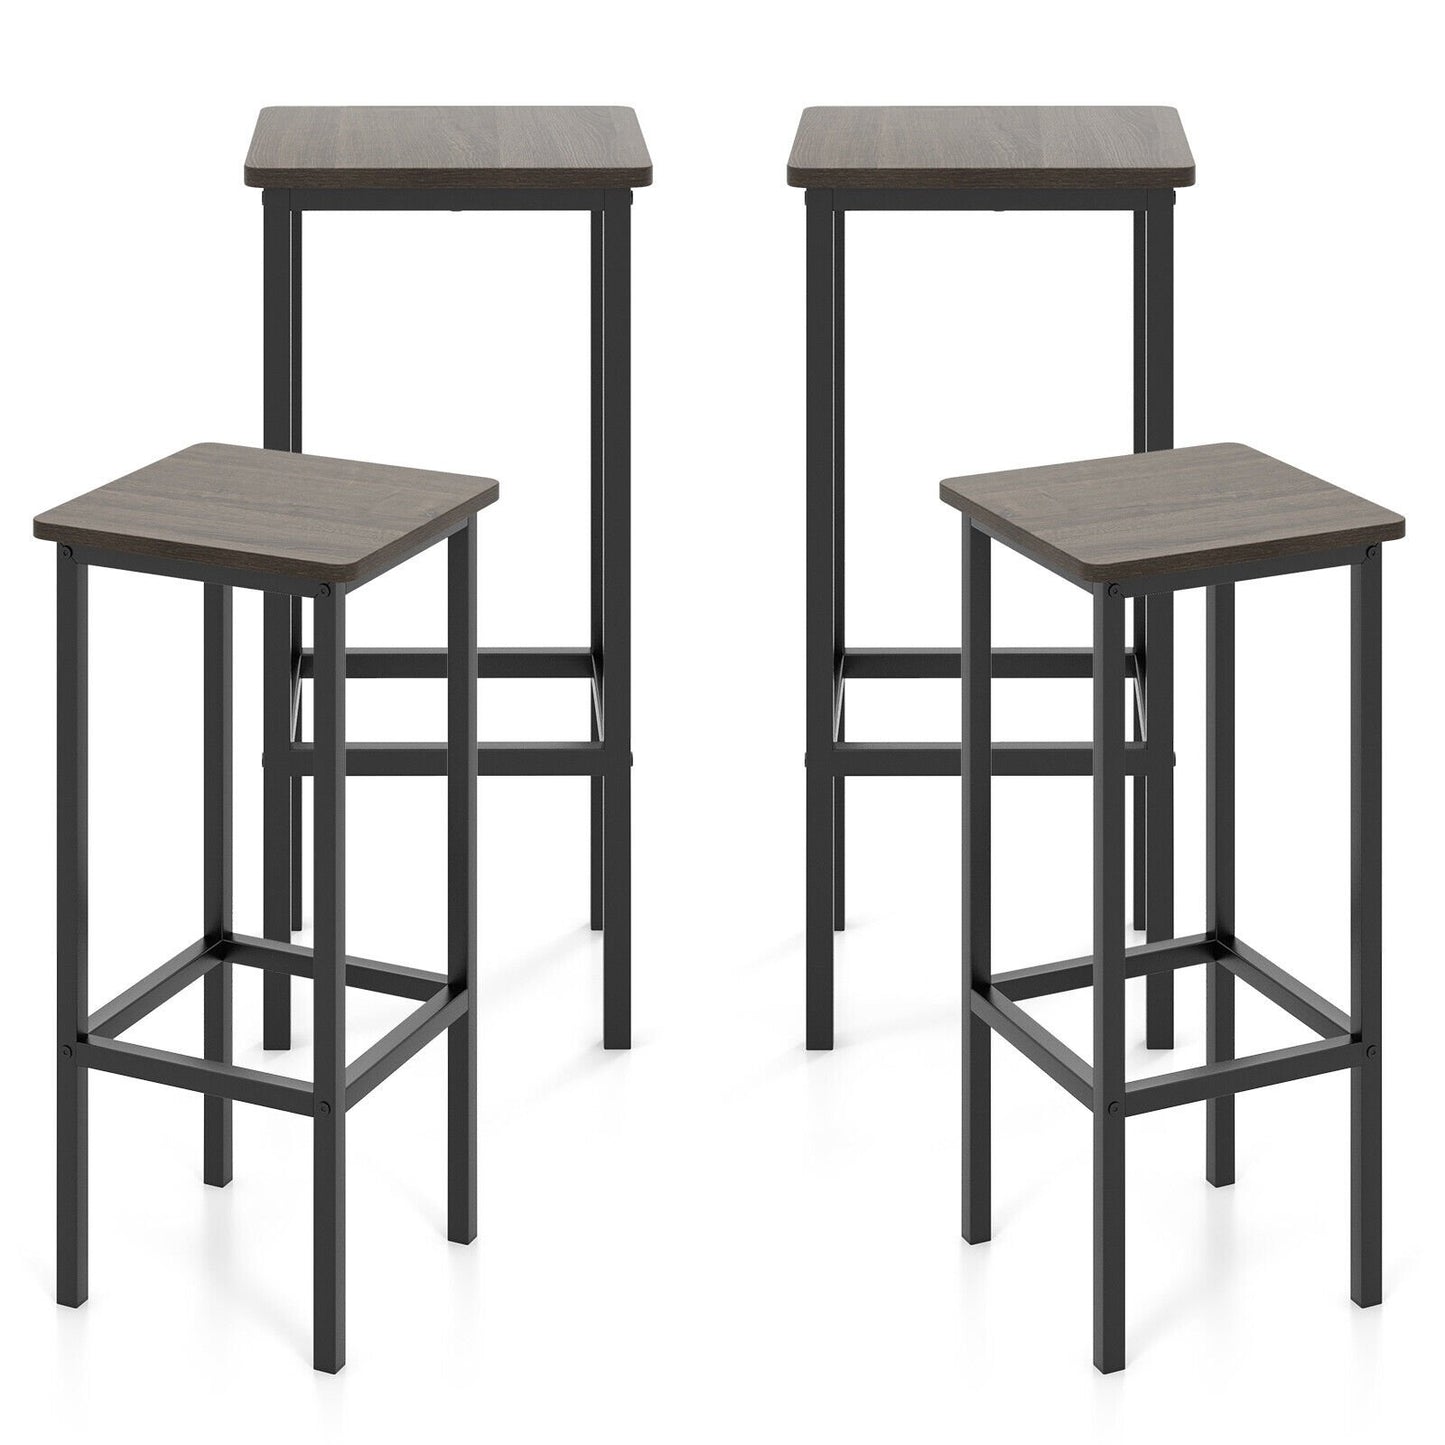 Set of 4 Bar Stool Set 26" Bar Chair with Metal Legs and Footrest, Gray